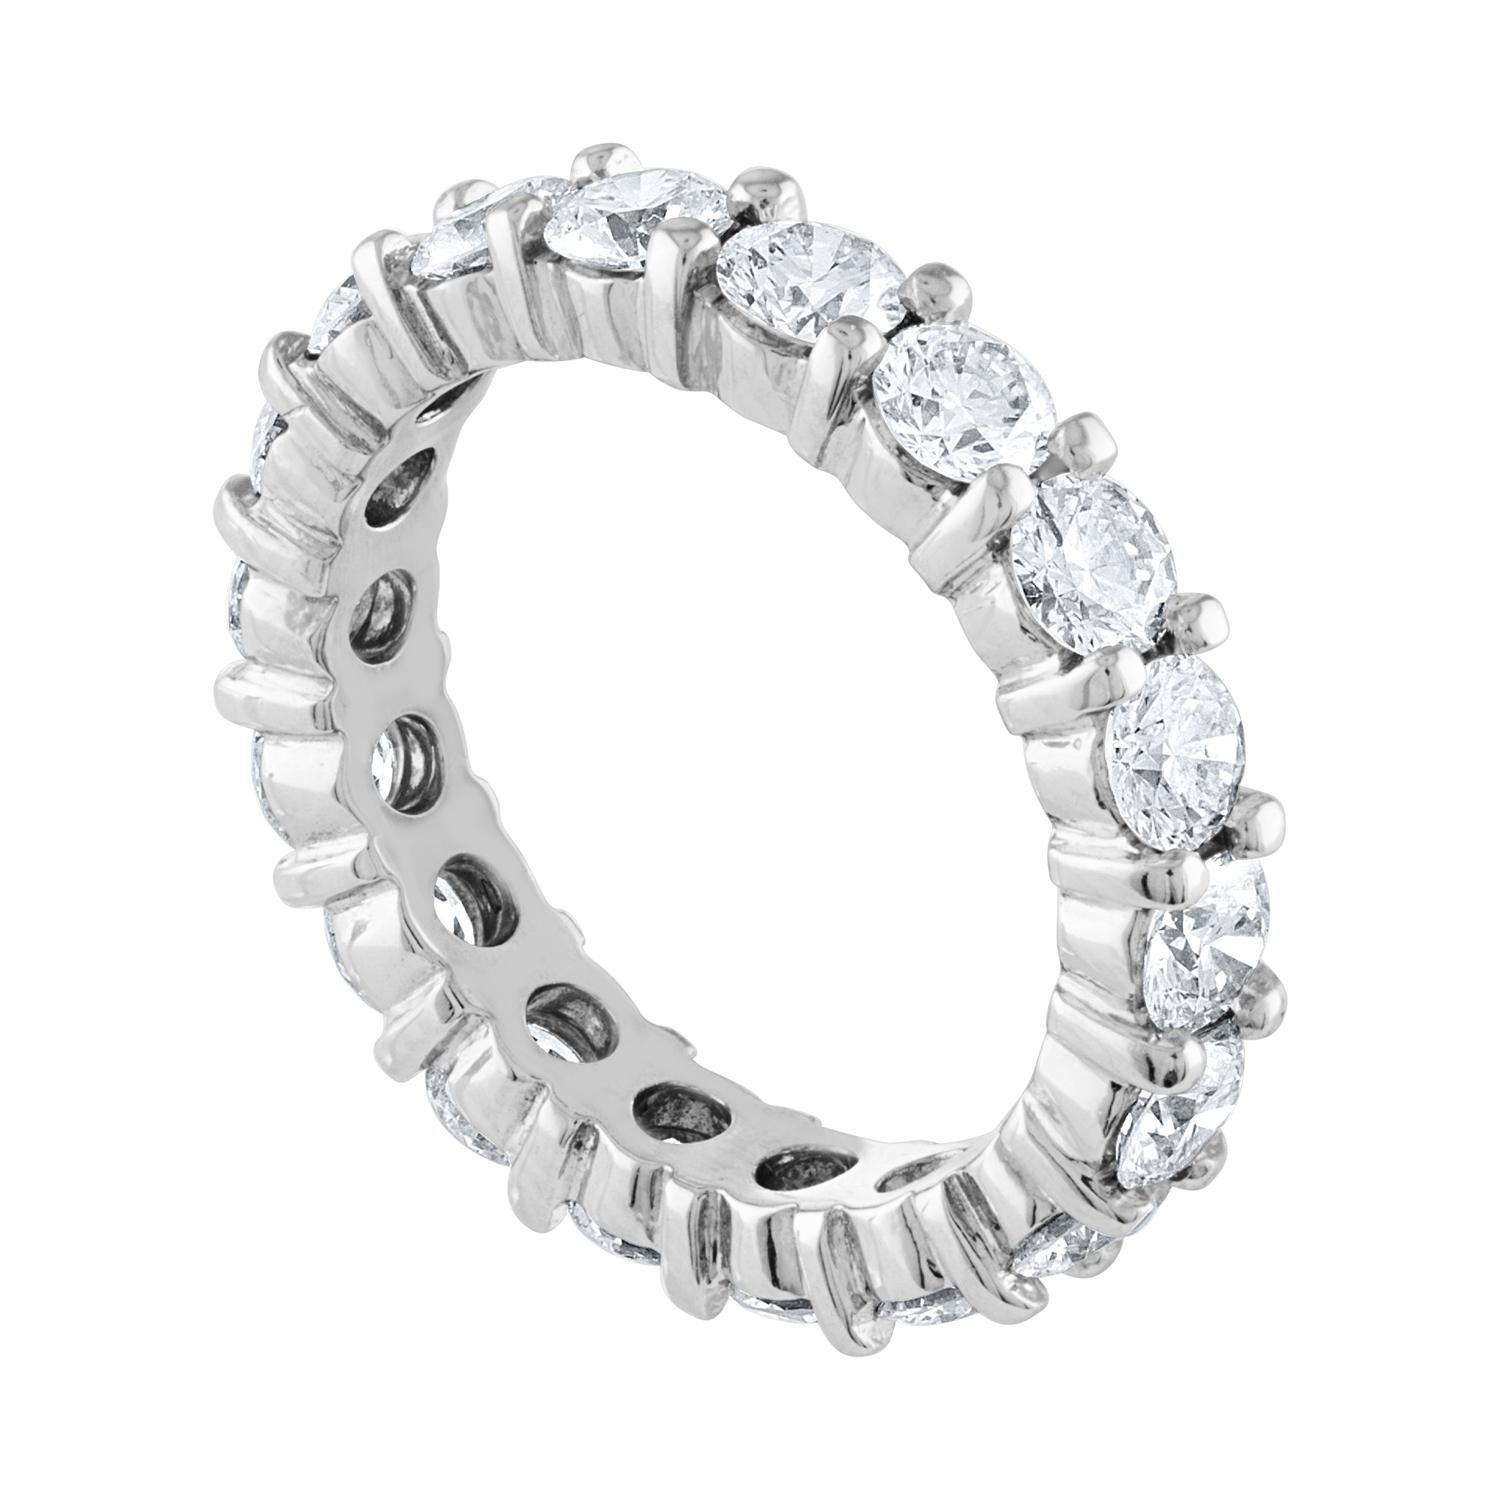 Beautiful Eternity Ring
The ring is 14K White Gold
There are 3.00 Carats In Diamonds F/G VS
The diamonds are round brilliant
The ring weighs 4.2 grams
The ring is a size 5.50, not sizable.